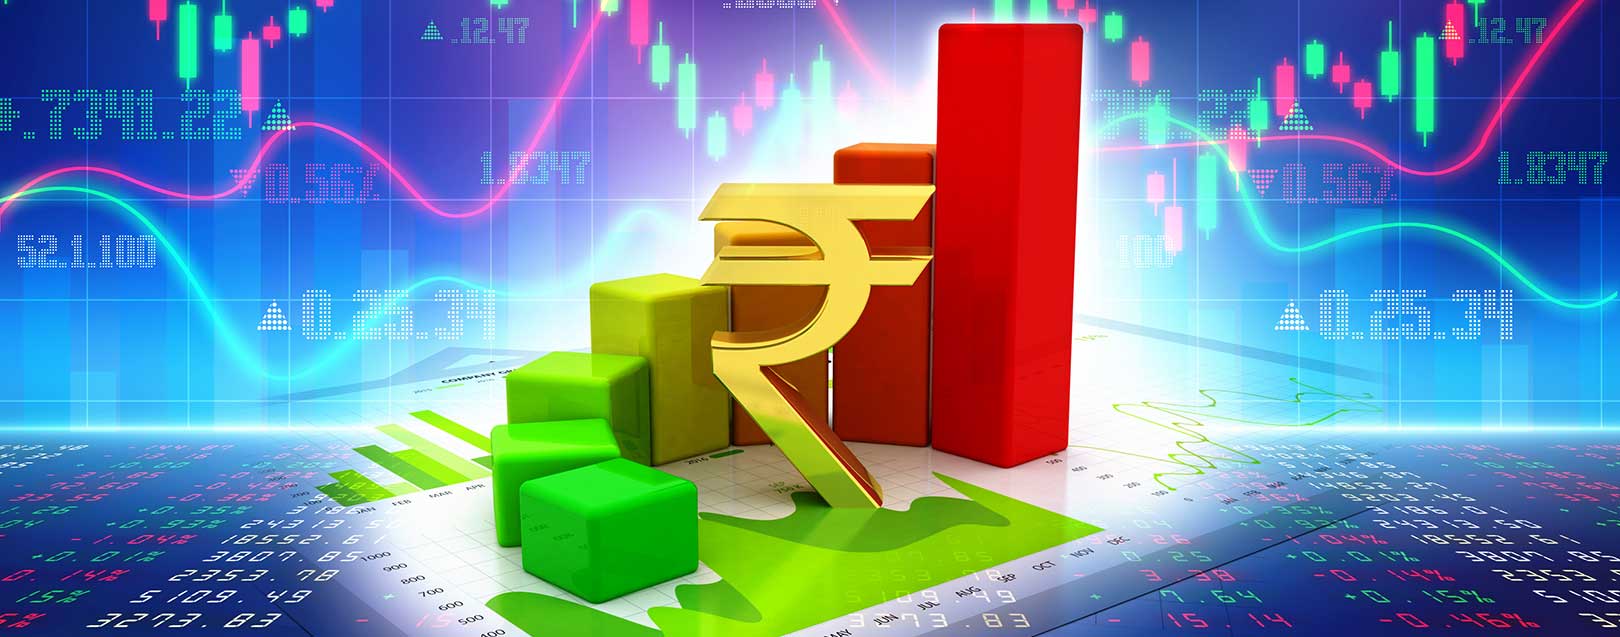 India’s economy grows 6.3% in Q2 this fiscal